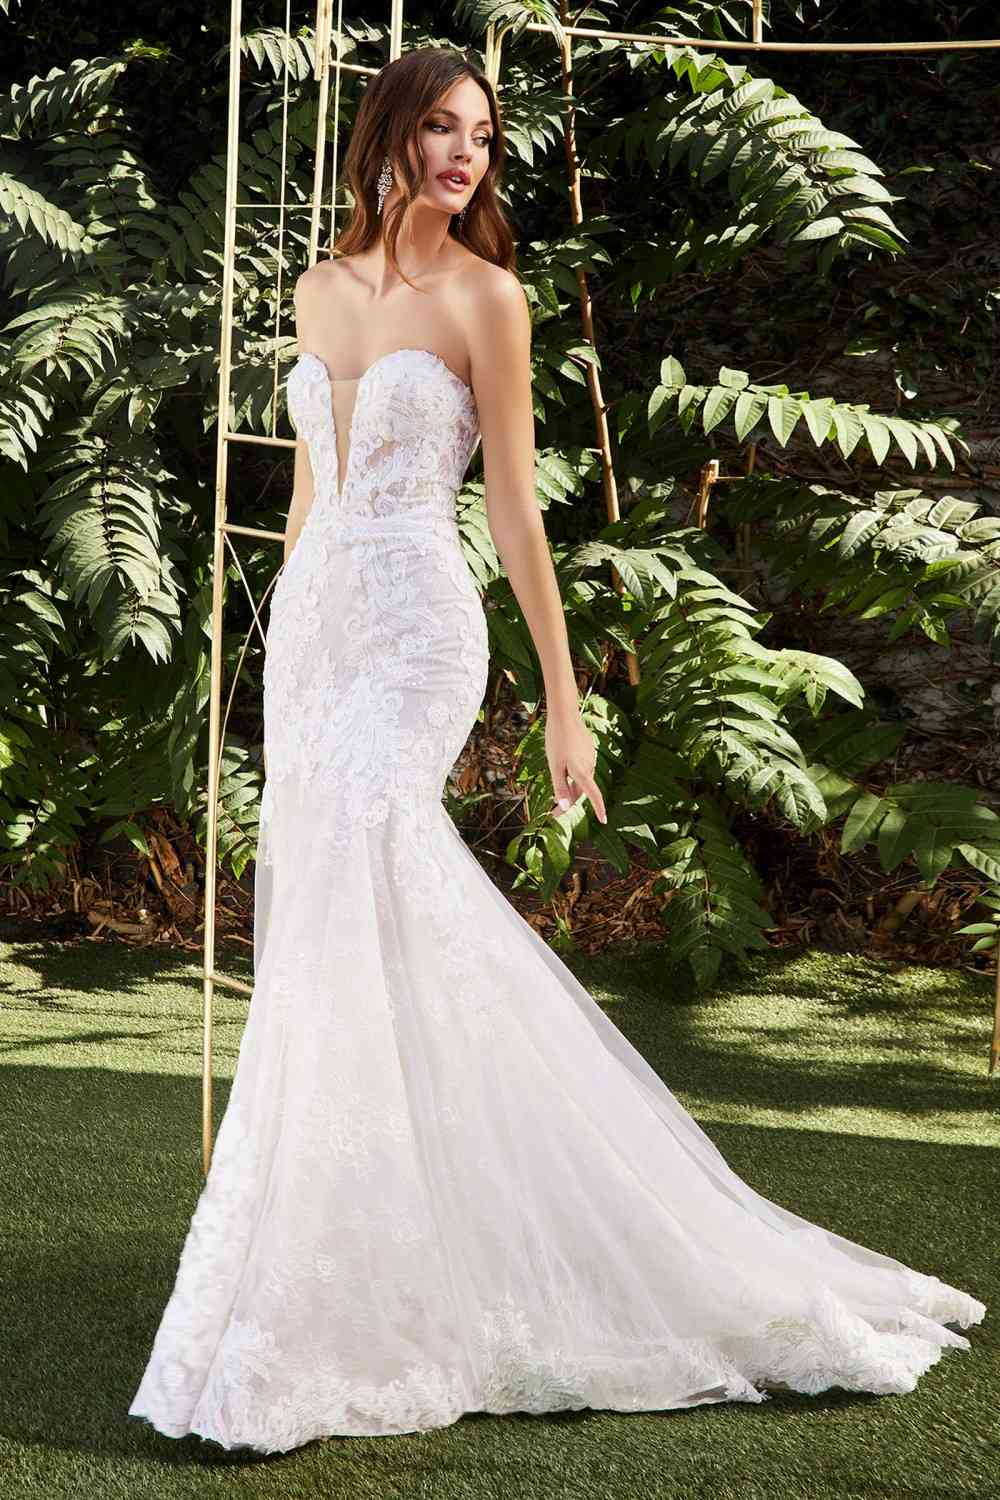 Cinderella Divine CD928 Strapless Mermaid Bridal Gown Layered Lace Scalloped Eyelash Lace Train